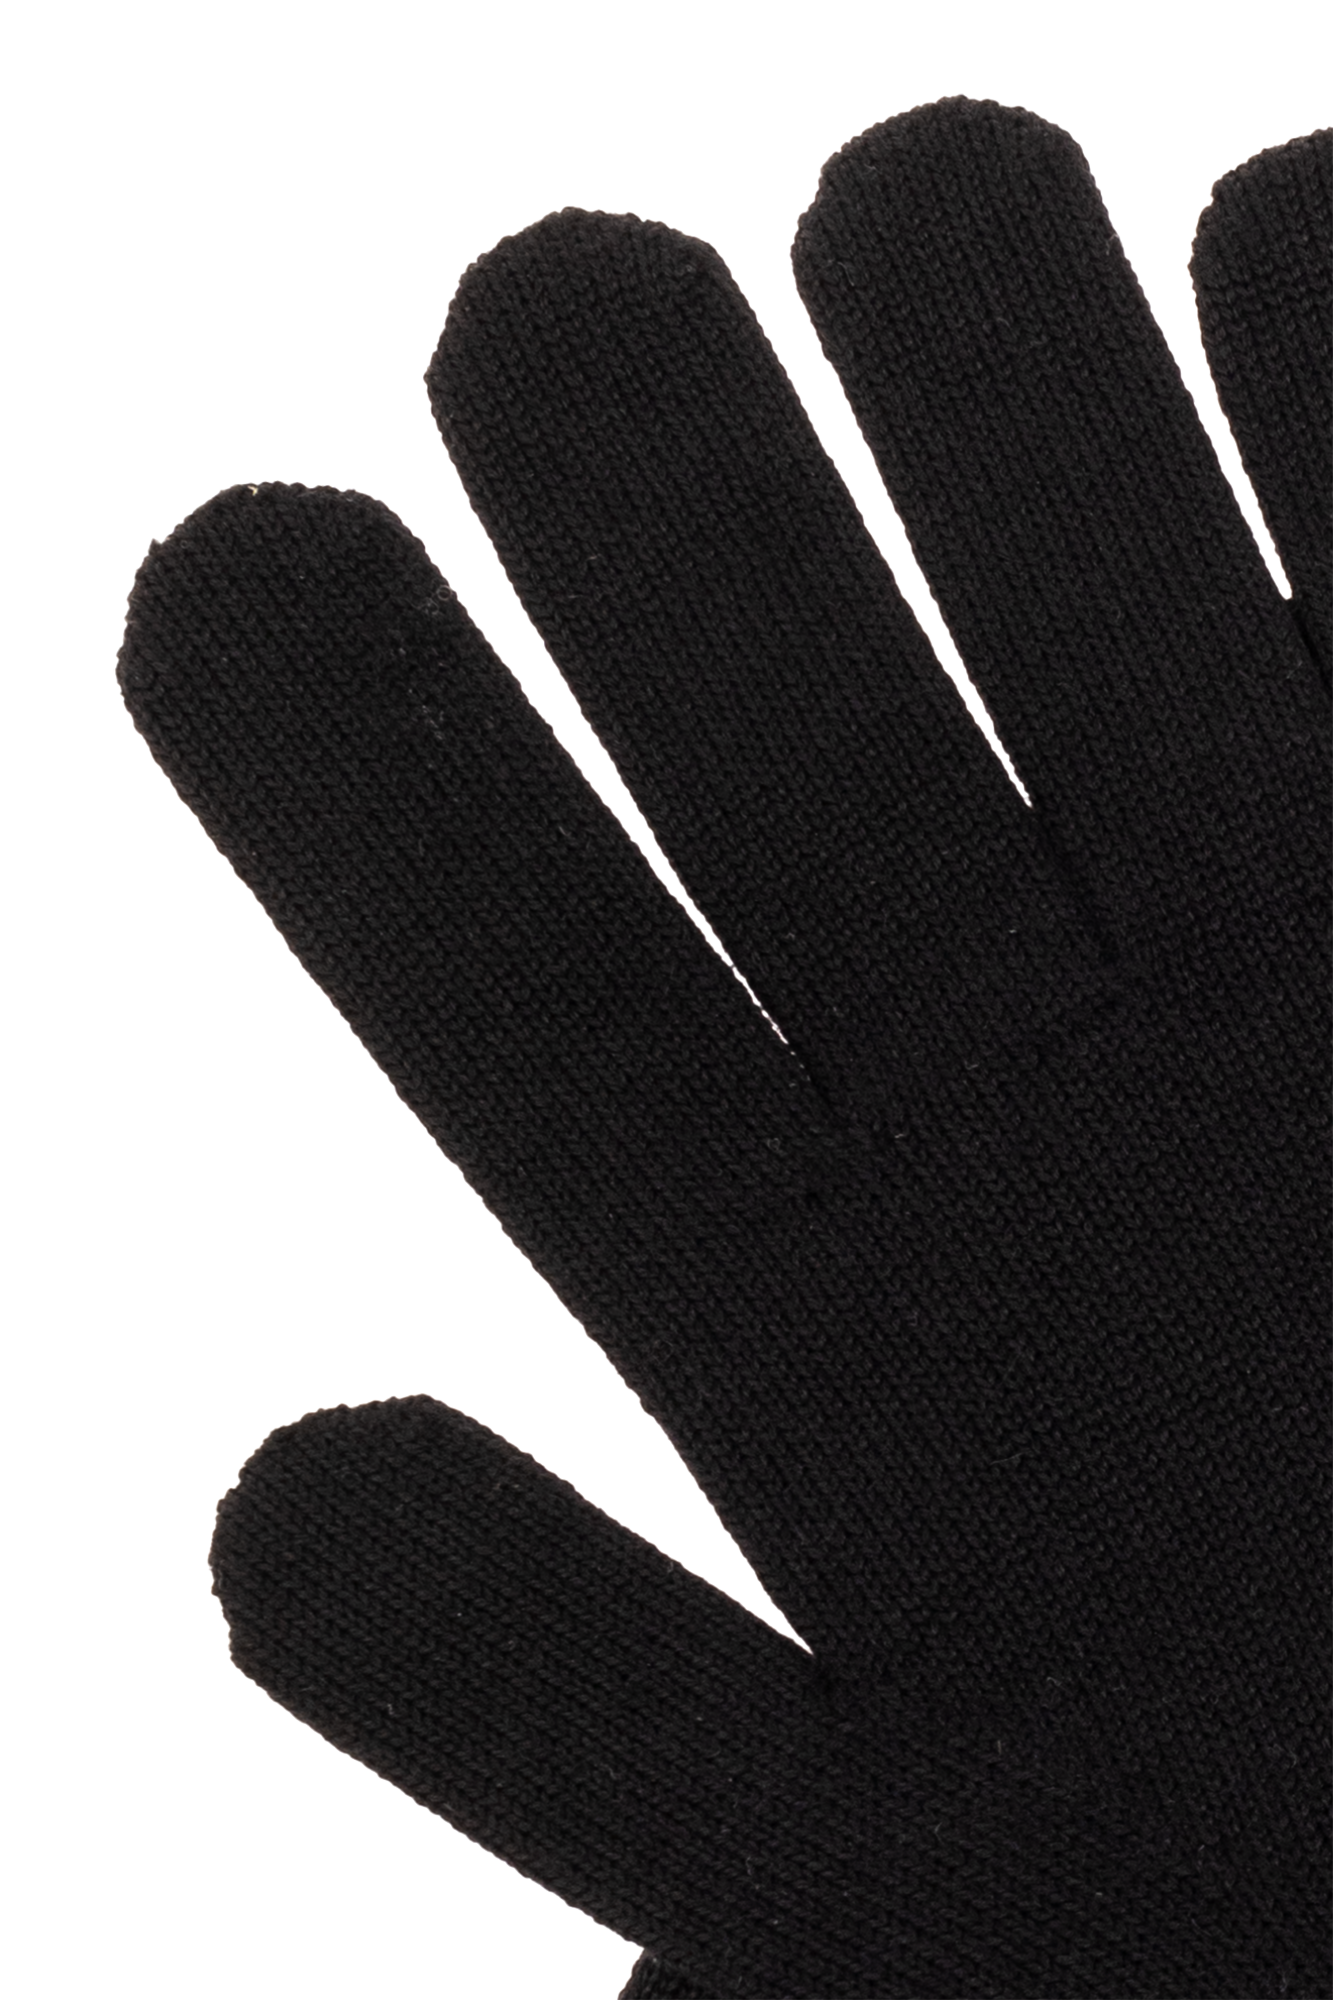 Givenchy Wool gloves with monogram